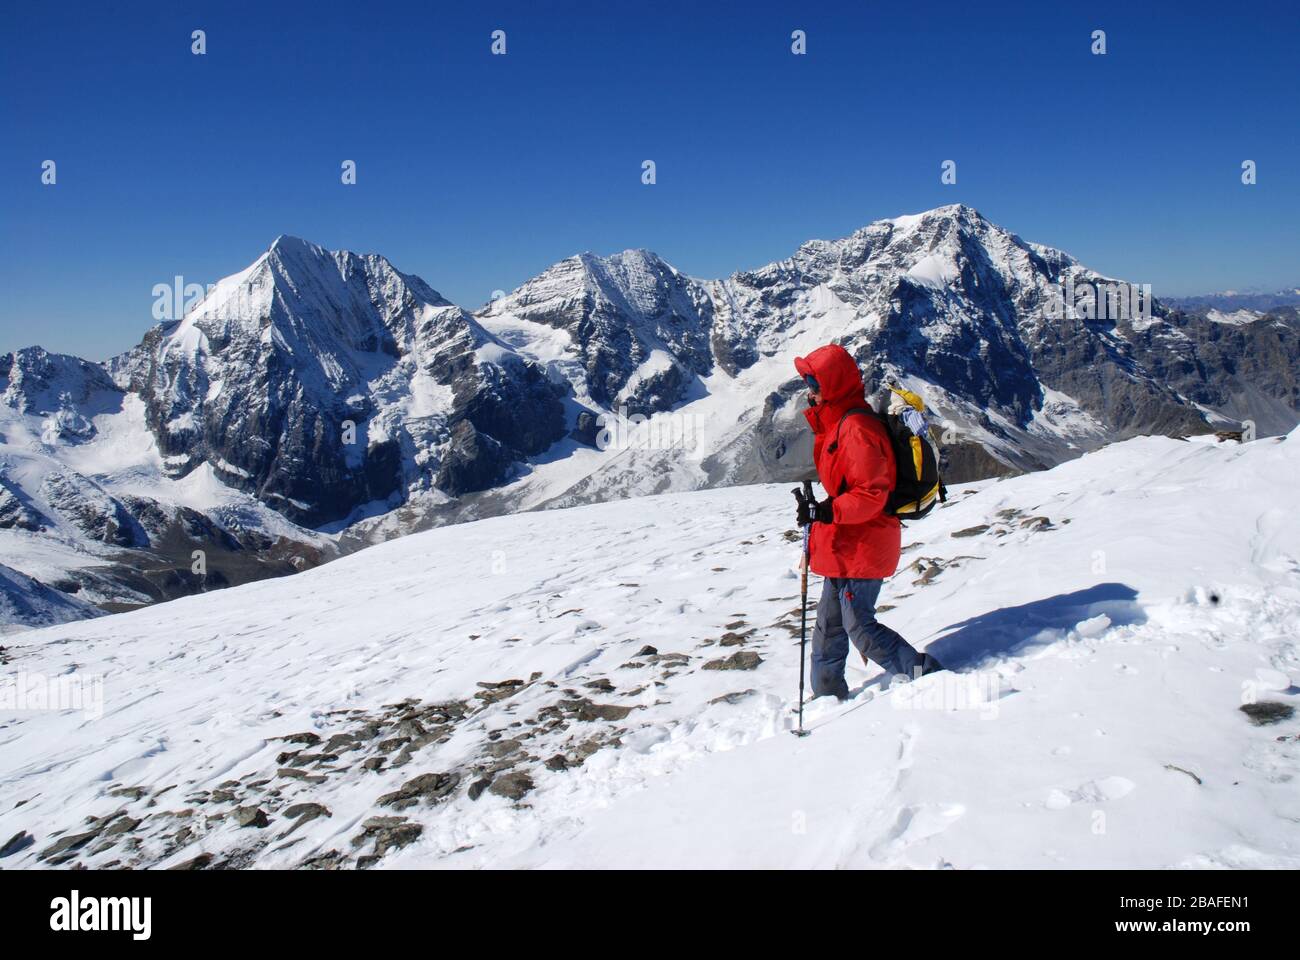 Hikeron snowcovered Madritschjoch with Ortles mountain in back,  .l. Königsspitze, r. Mount Ortles, Alto Adige, Italy Stock Photo